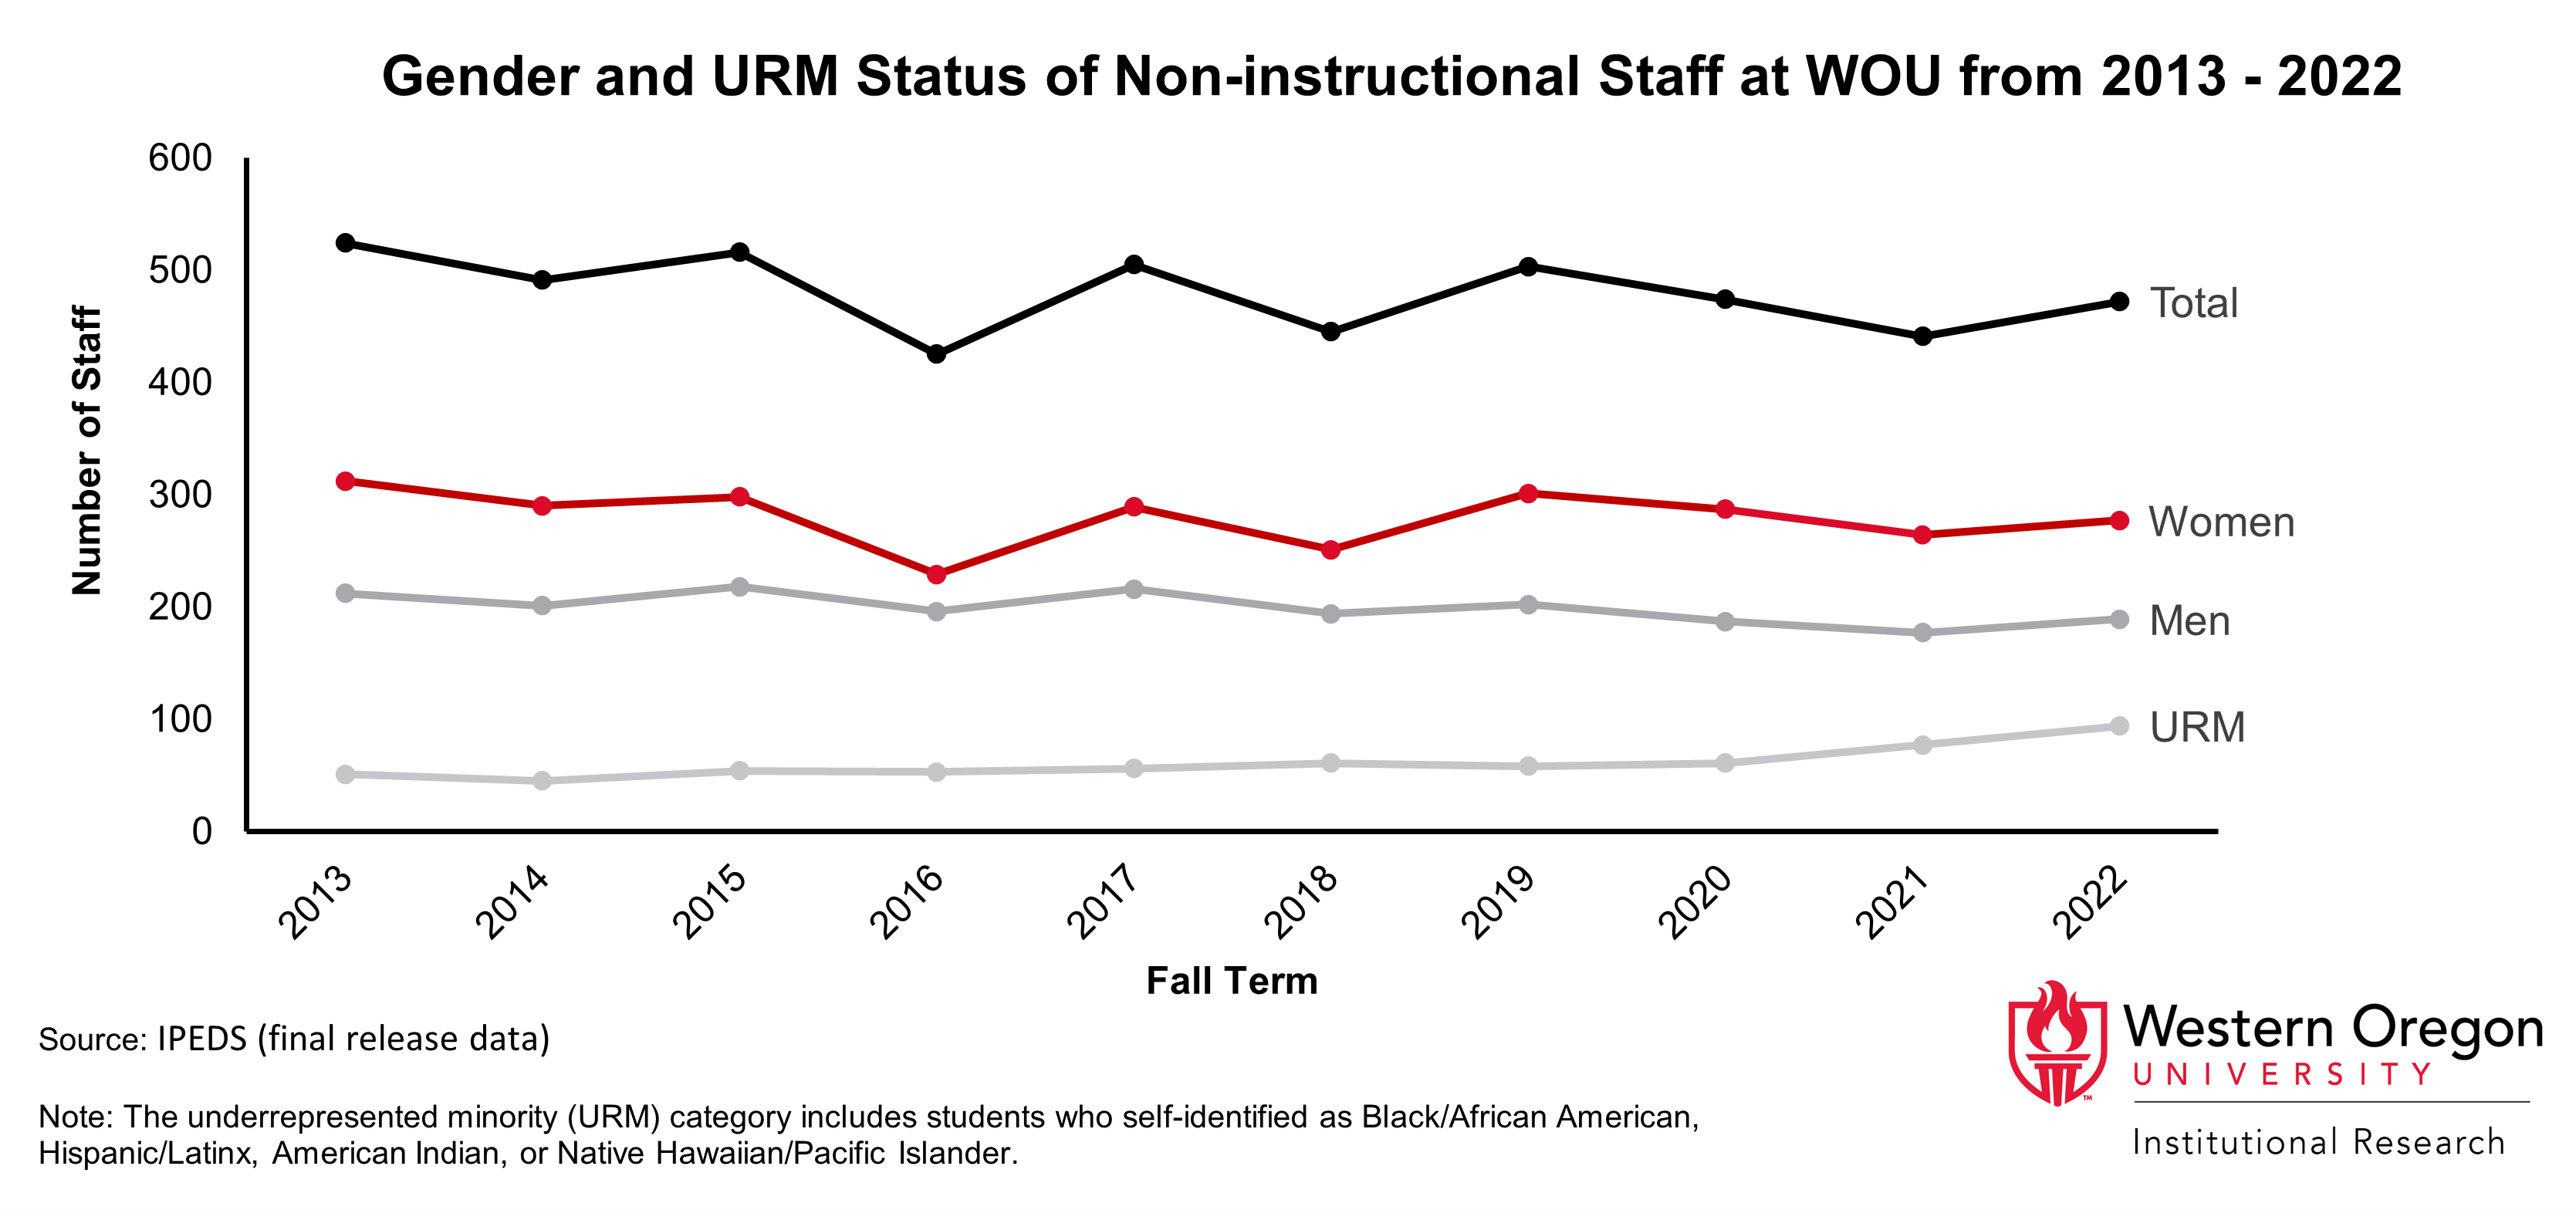 Line graph of the number of all non-instructional staff, staff that identify as men, staff that identify as men women, and staff that identify as members of an underrepresented minority group. The number of staff overall has shown a modest decrease since 2013, but the number of staff that identify as members of underrepresented minority groups has increased.